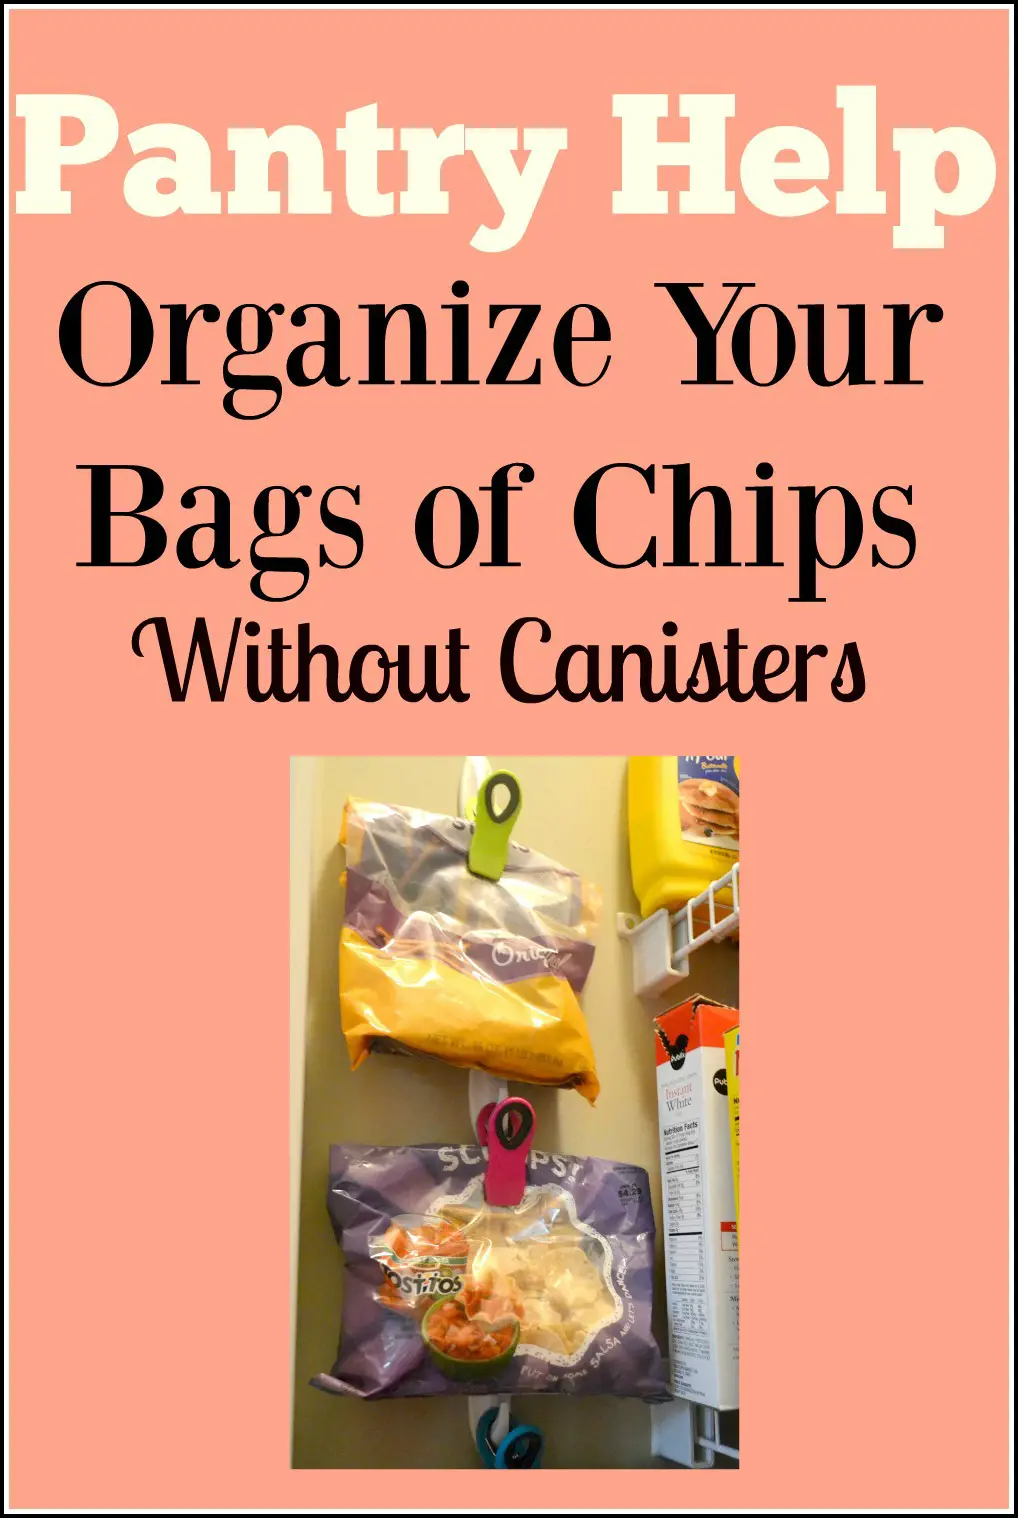 https://fennellseeds.com/wp-content/uploads/2016/04/Organize-Bags-of-Chips-without-Canisters.jpg